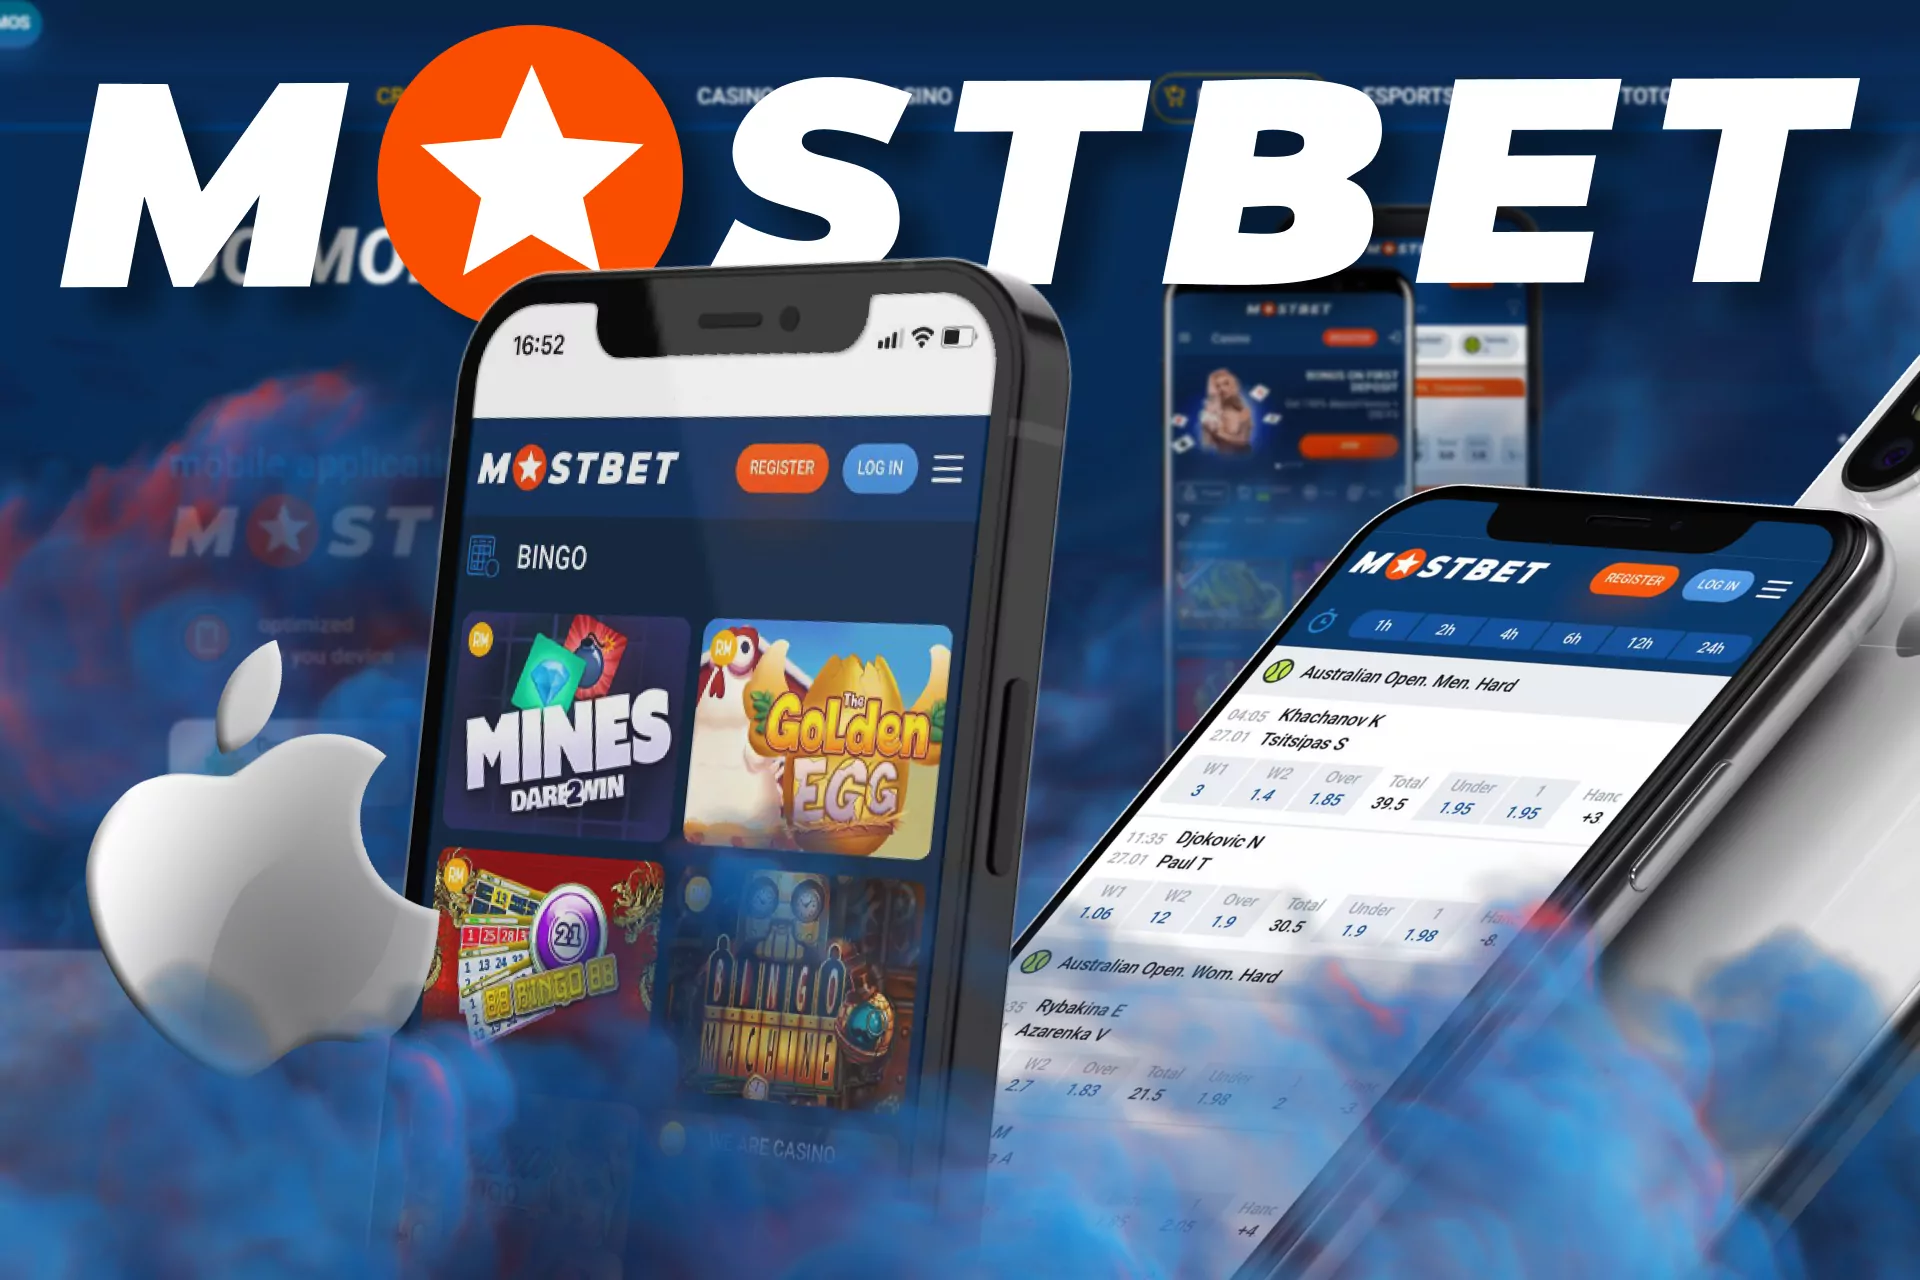 Mostbet betting company and casino in Egypt - play and make bets - Pay Attentions To These 25 Signals